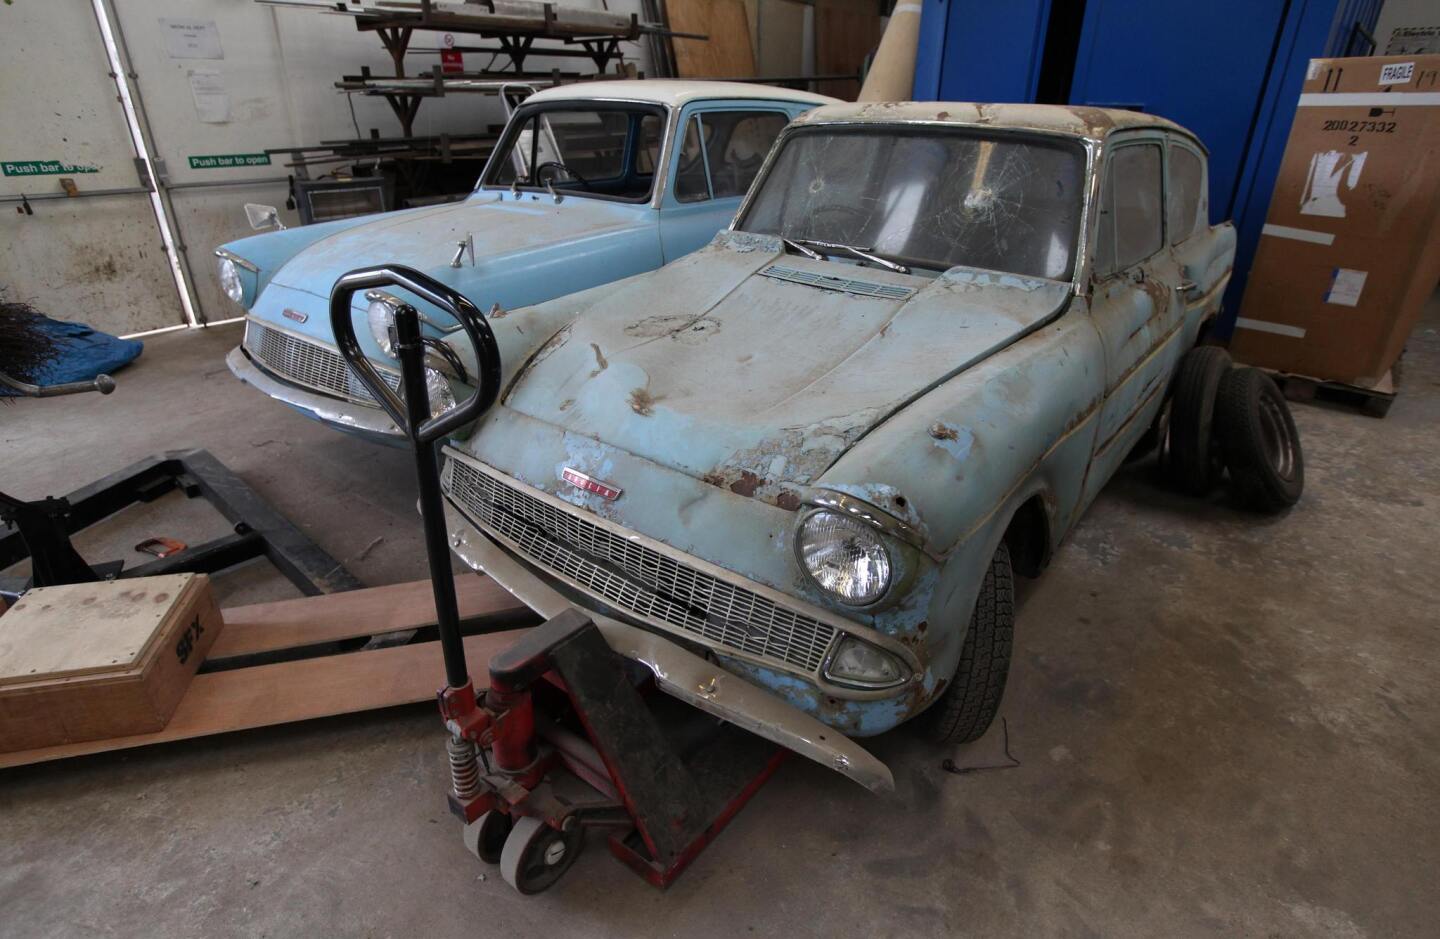 These Ford Anglia's have definitely seen better days.